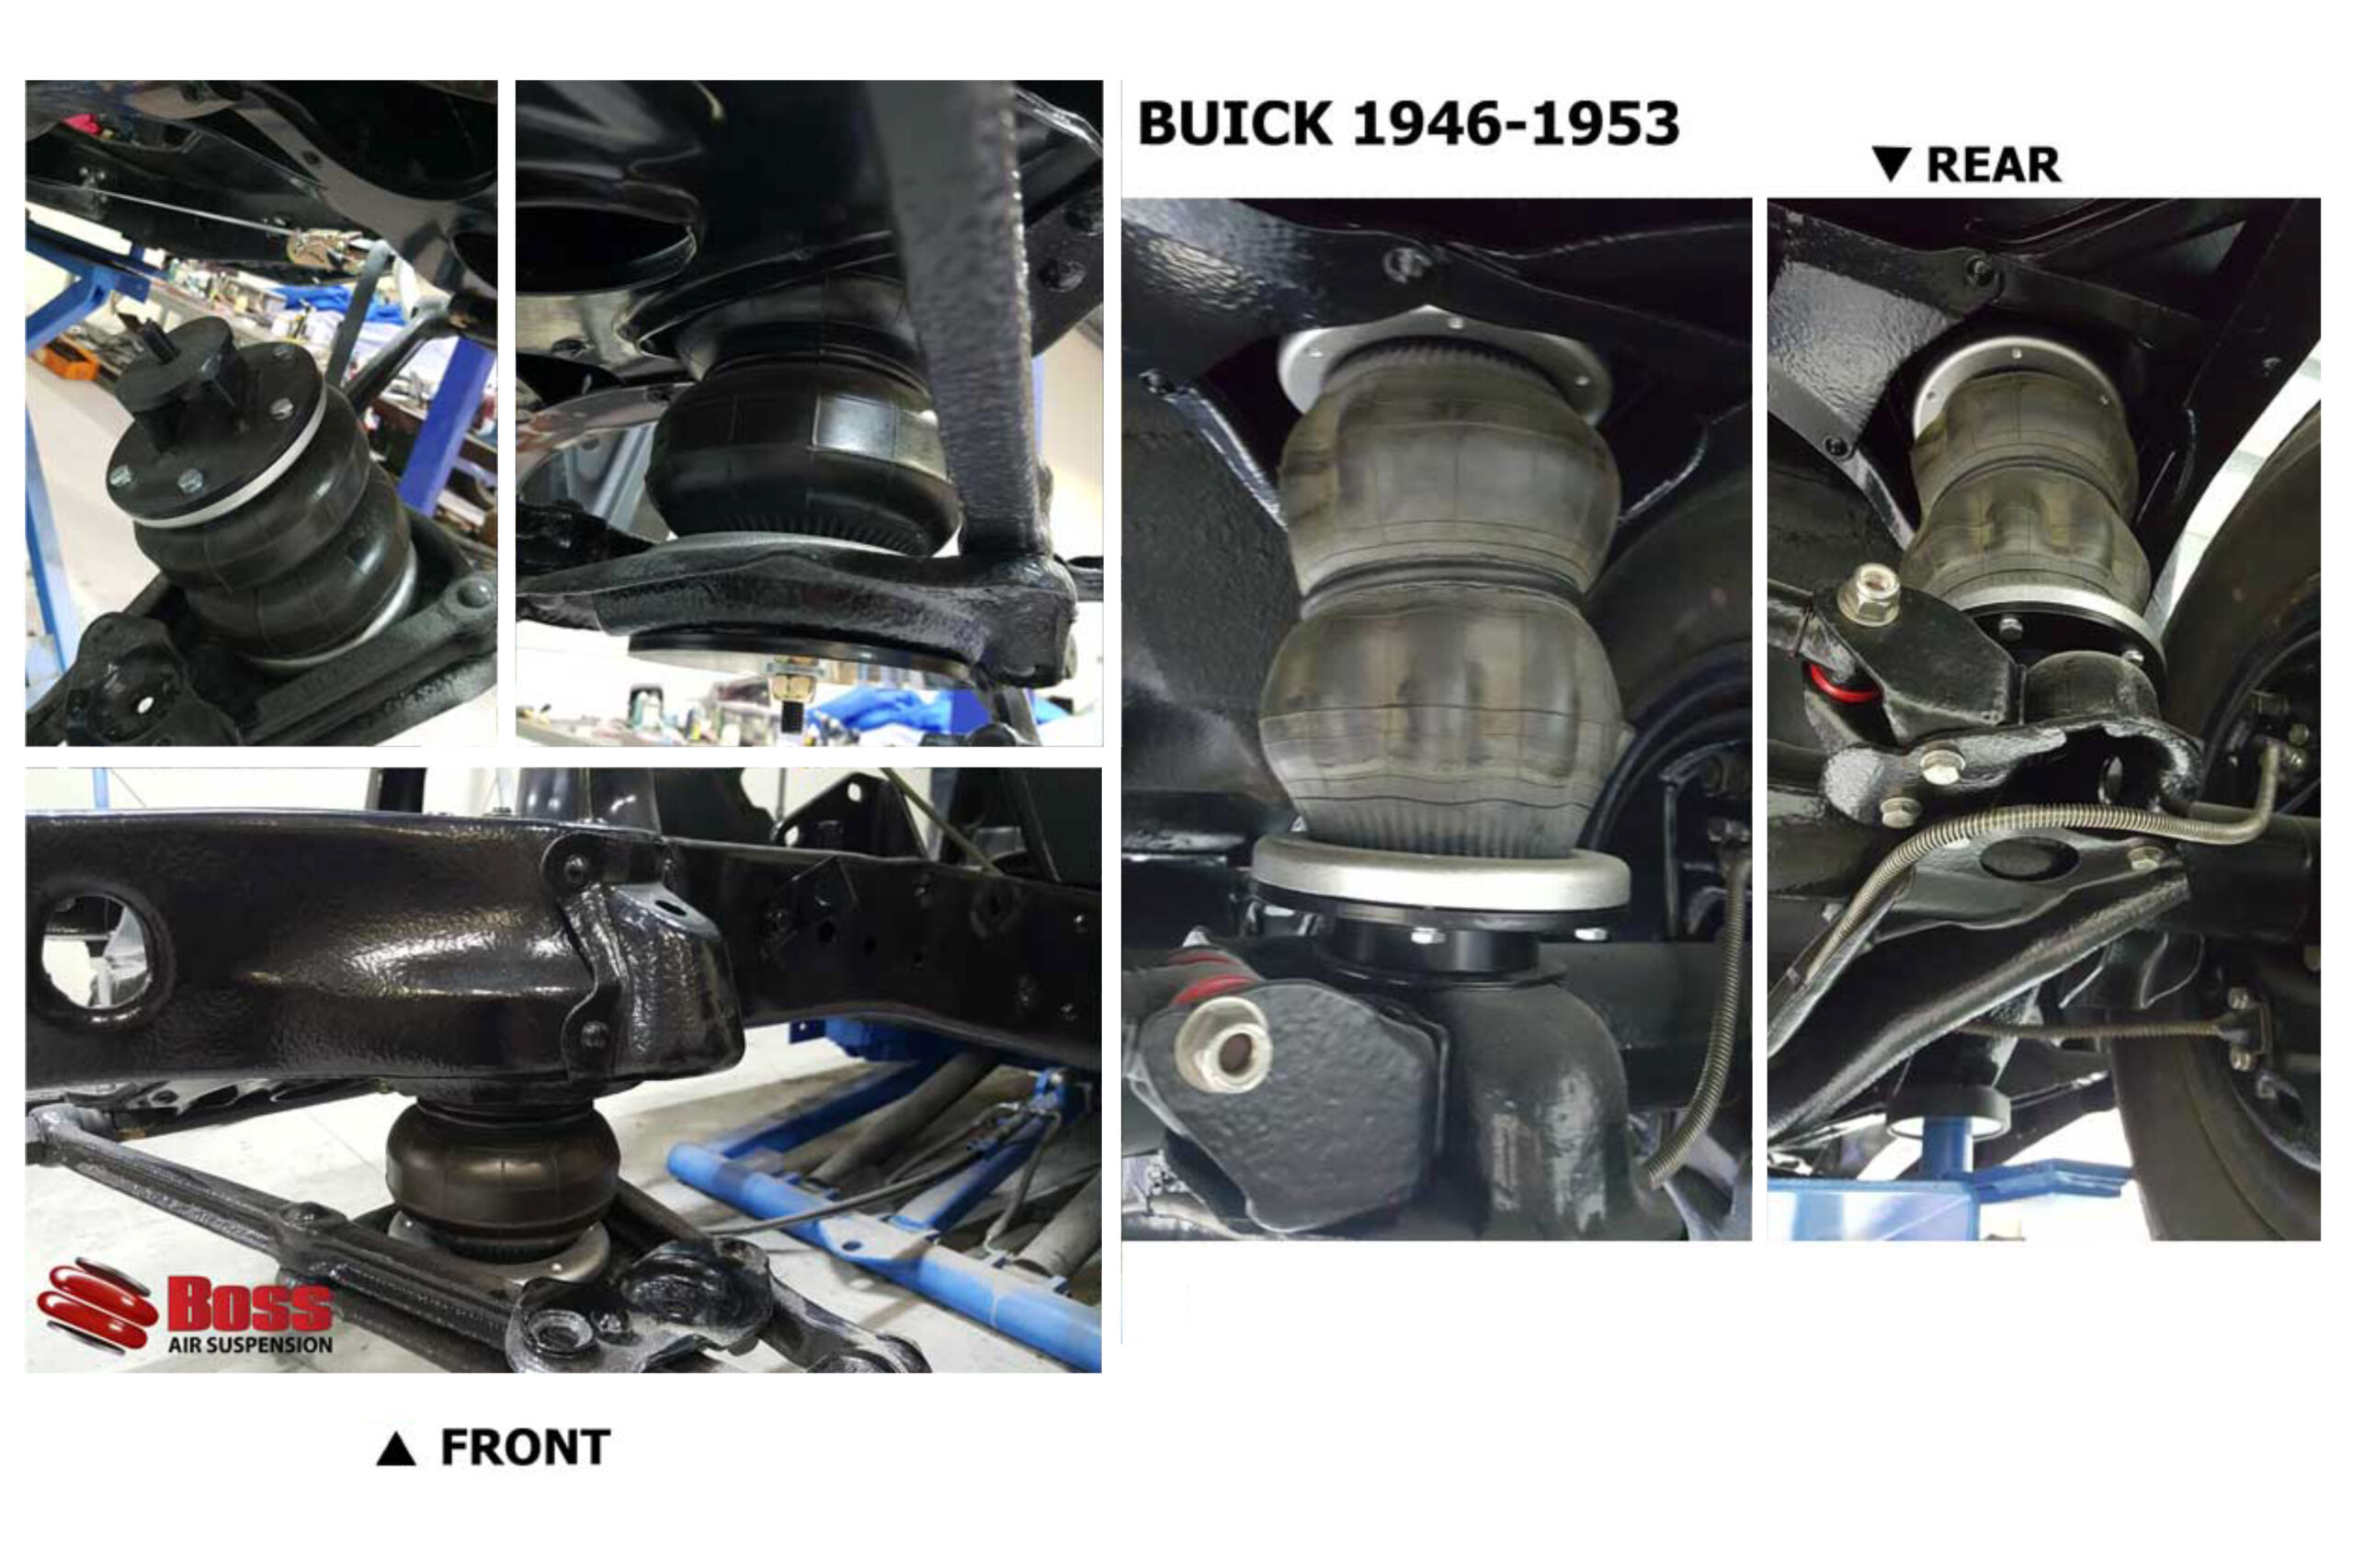 Buick Front and Rear Airbag Suspension for the 1946 to 1953 Buick